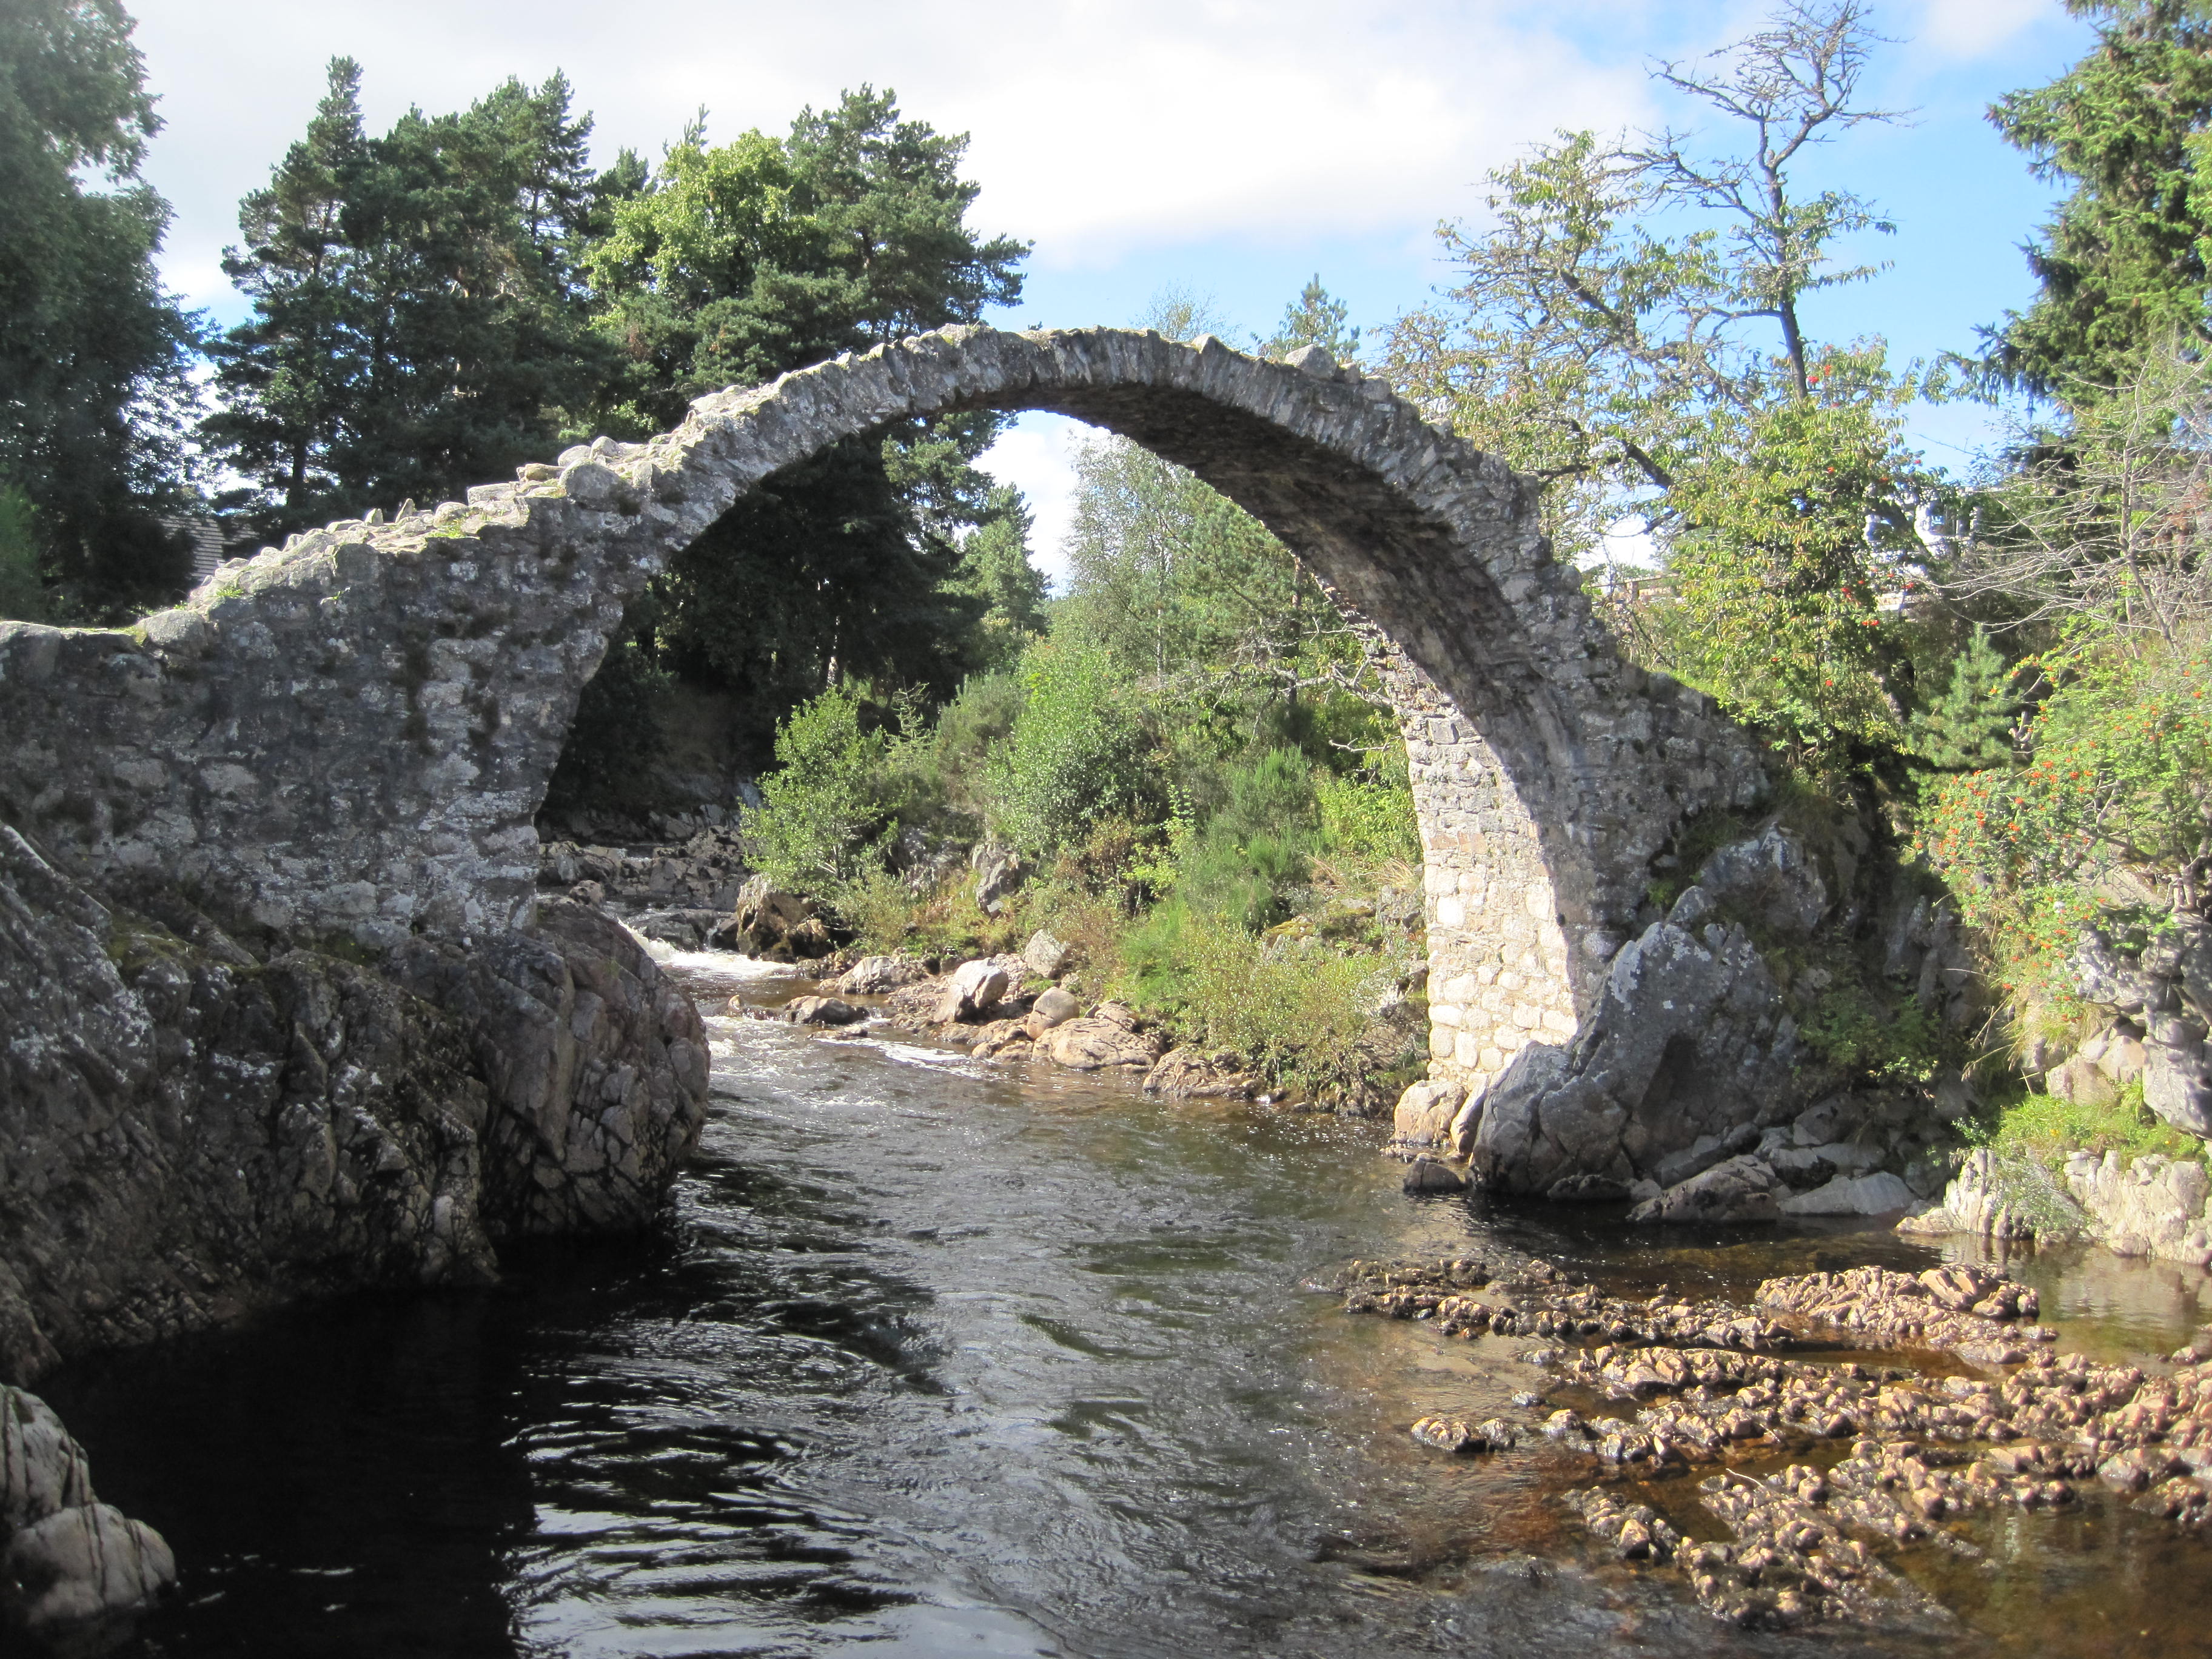 Arched stone bridge with 5-foot displacement in arch.